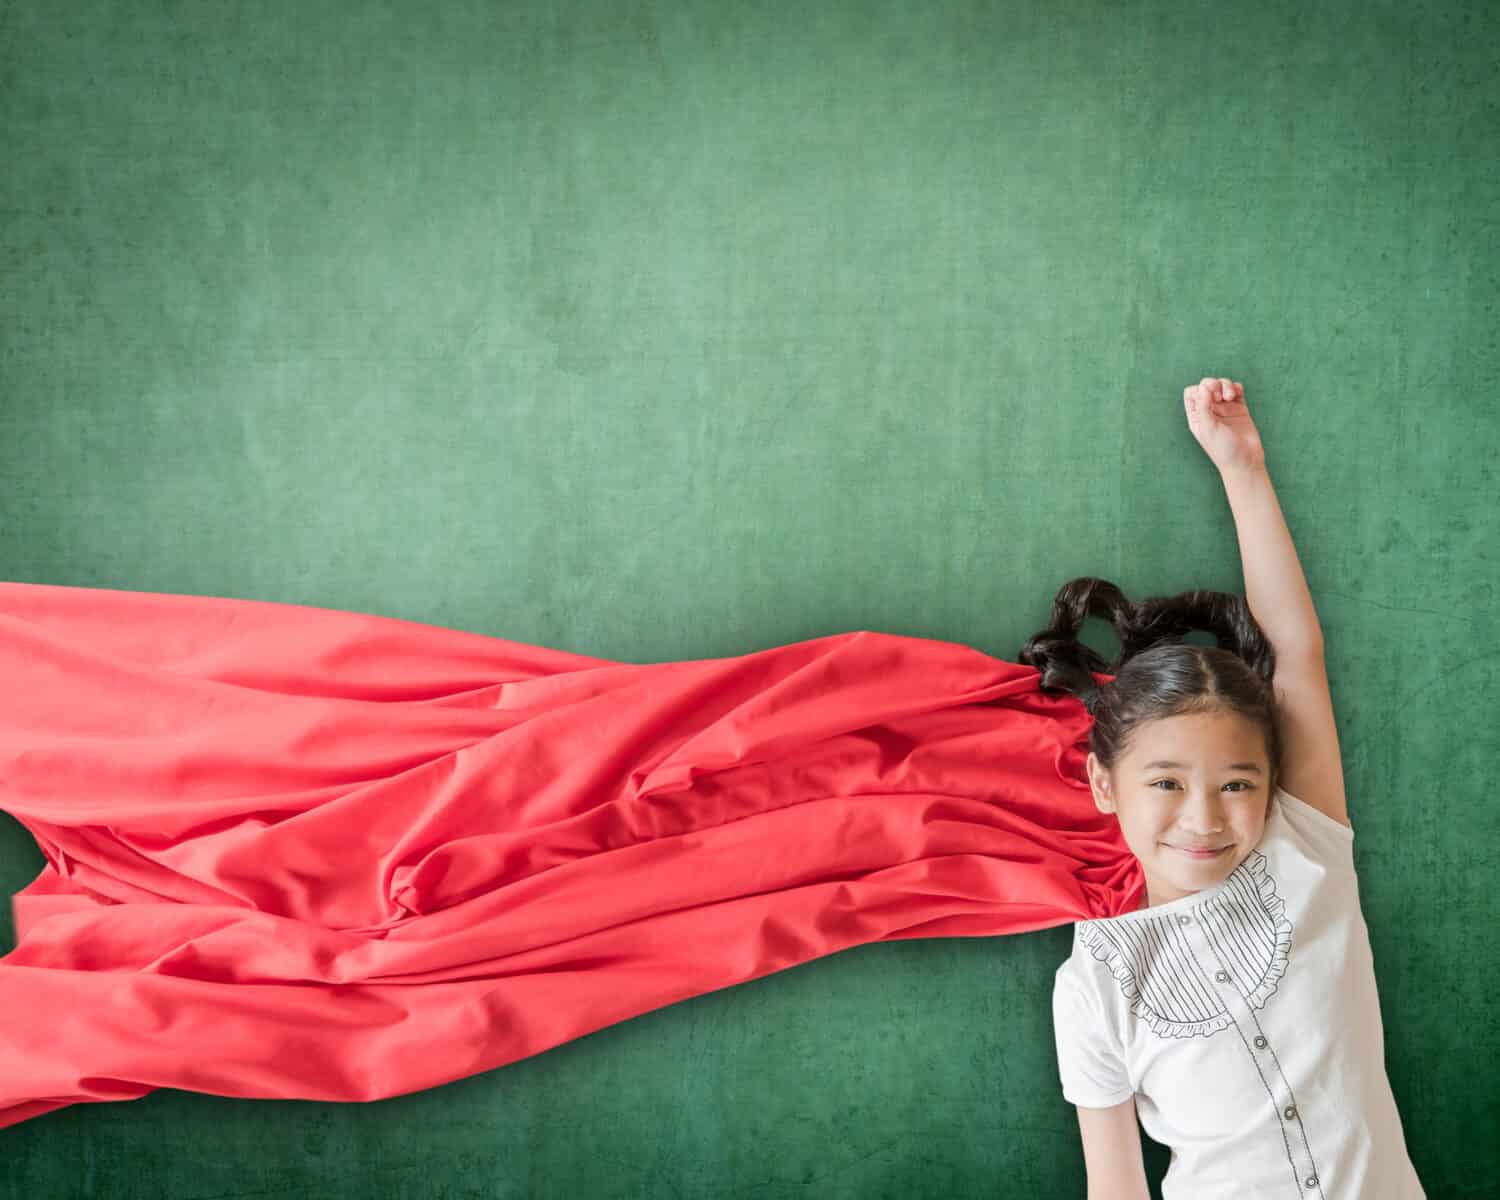 Superhero Asian school girl kid student with inspiration in women rights in education success concept